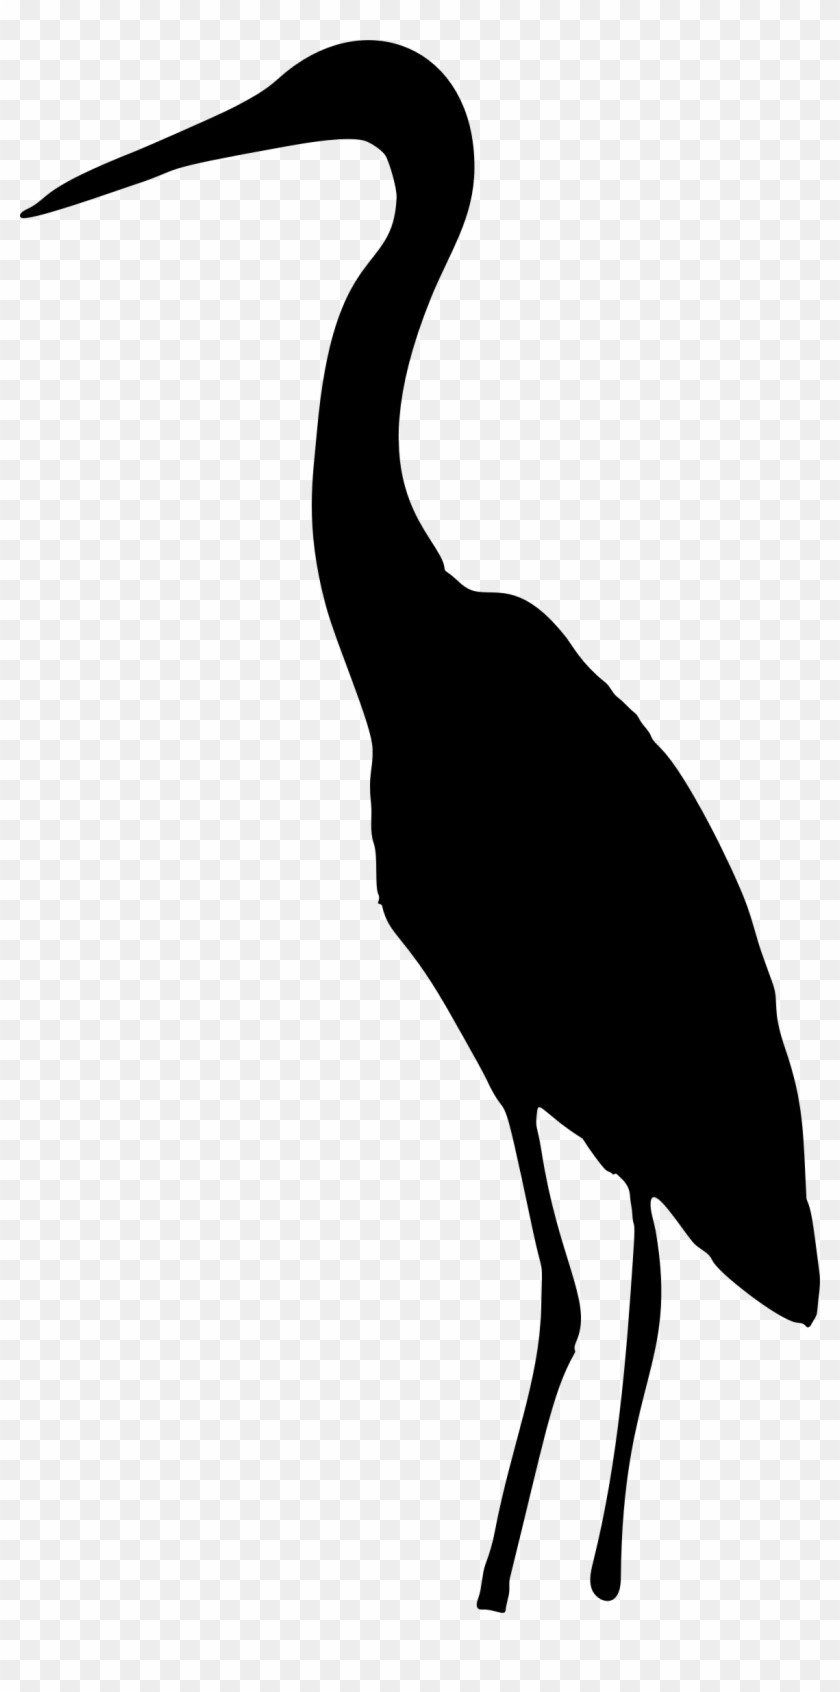 This Free Icons Png Design Of Heron Silhouette - Heron Silhouette Png Clipart #3639826